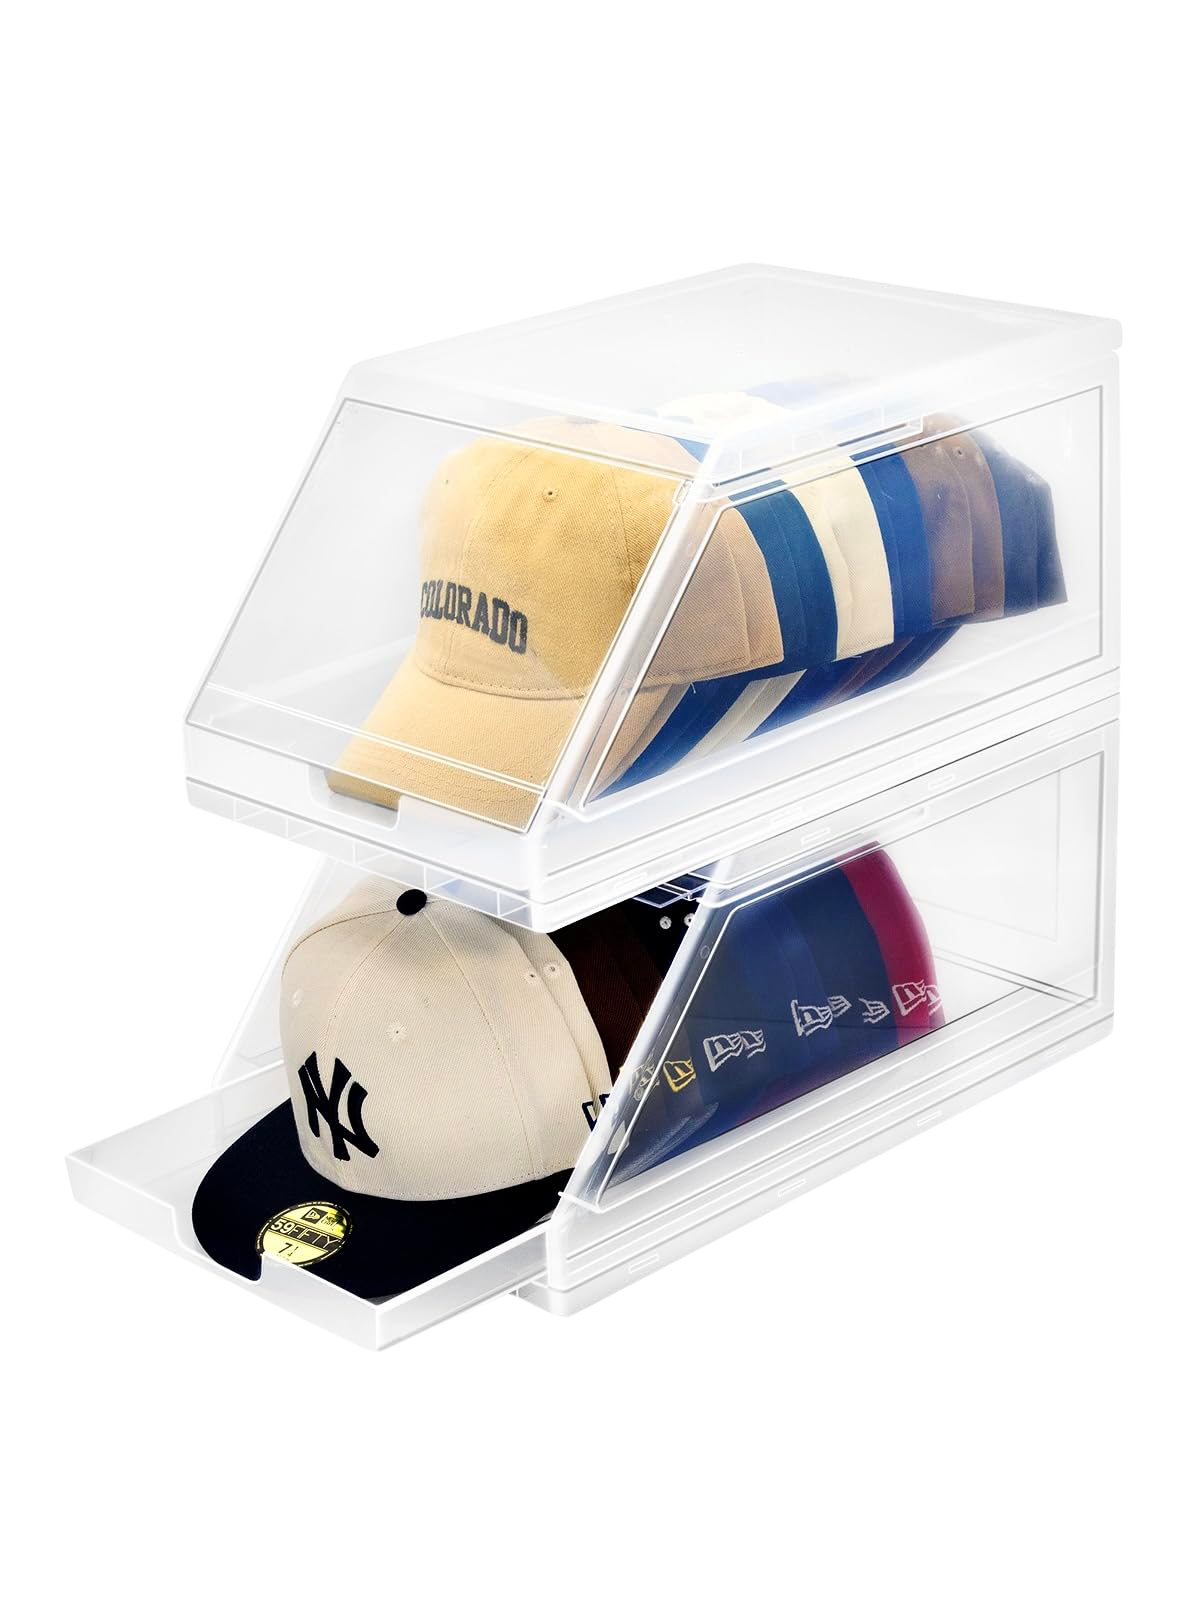 Top 5 Best Hat Storage Solutions in [year] - Straight.com